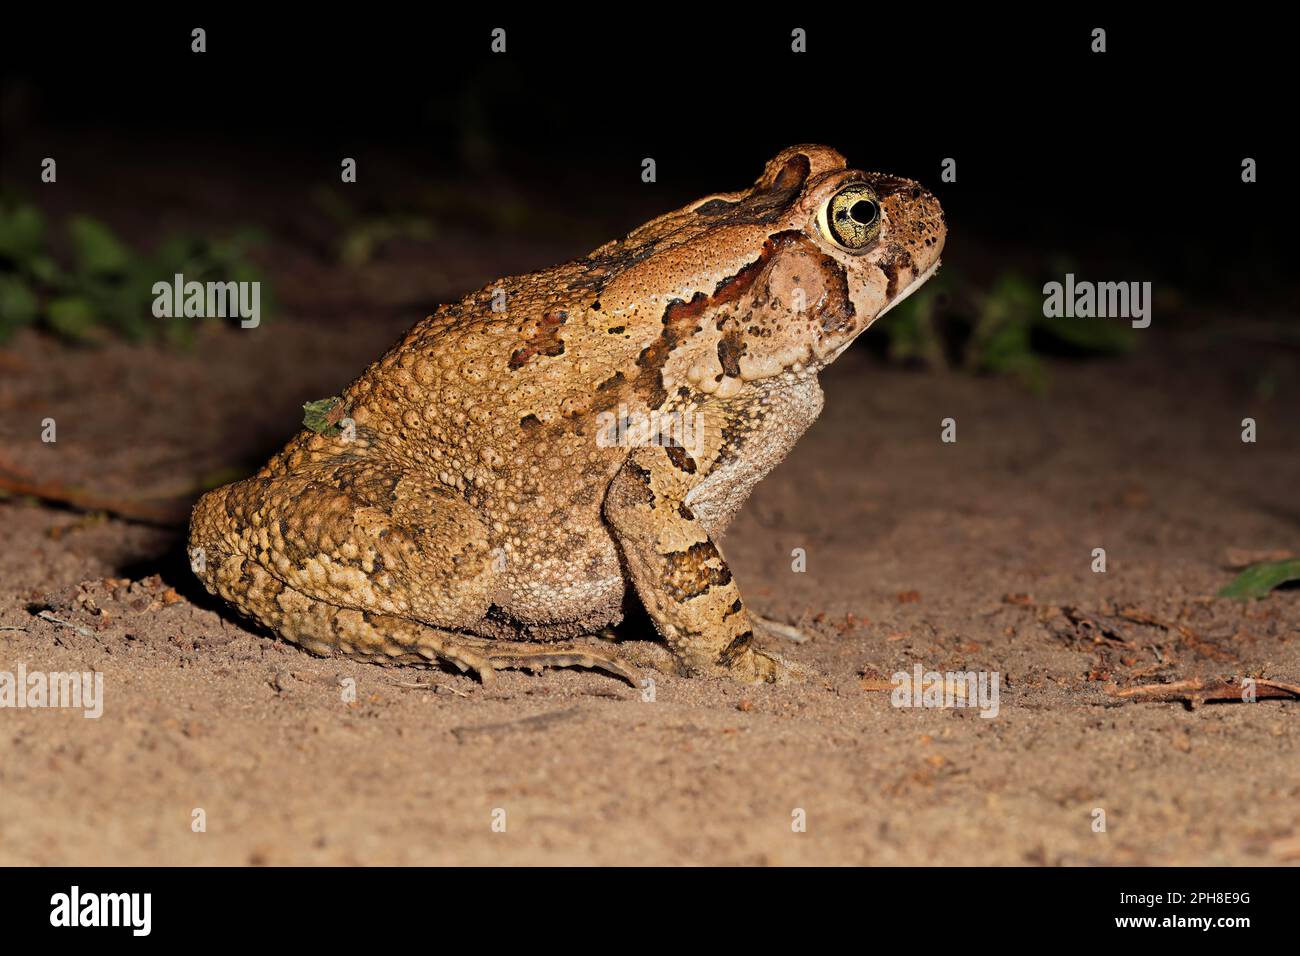 A nocturnal guttural toad (Amietophrynus gutturalis) foraging, South Africa Stock Photo